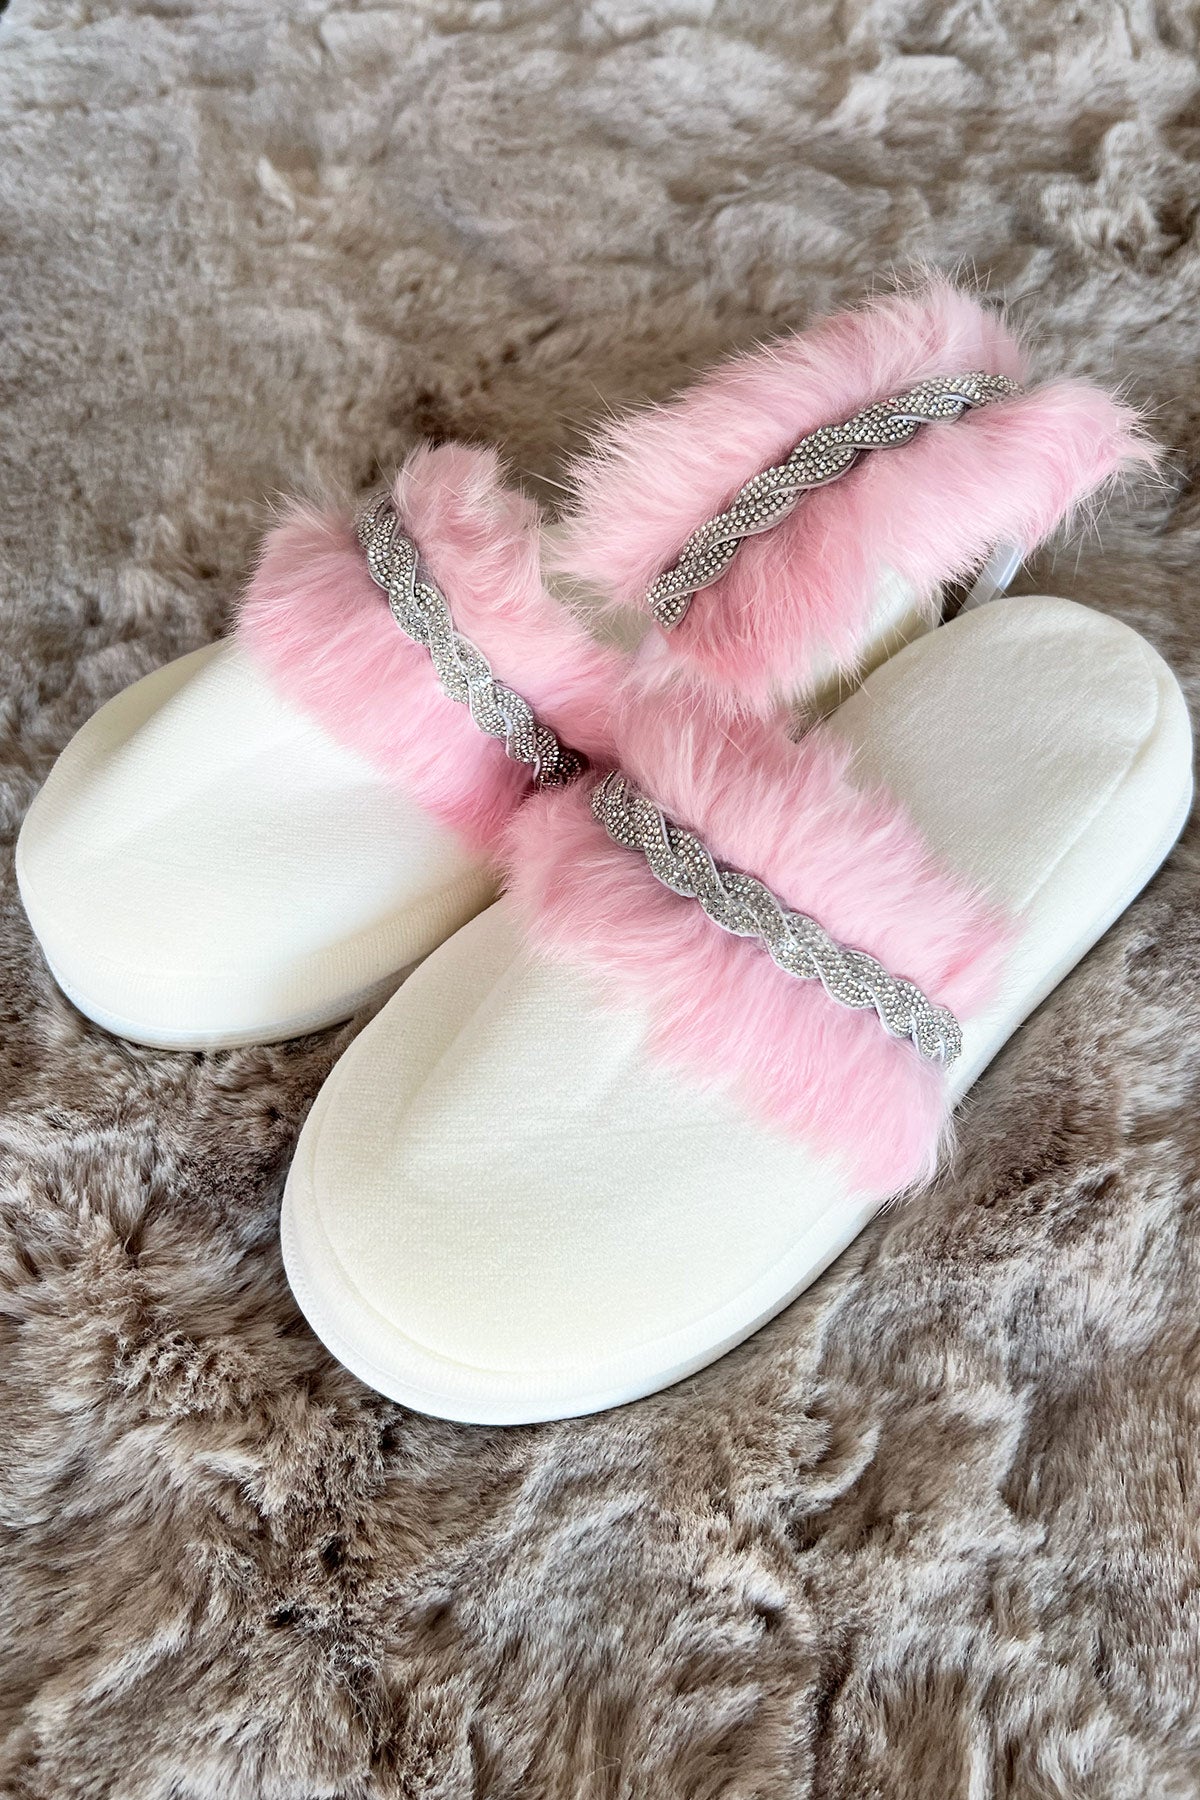 Shopymommy 757108 Feather Themed Maternity Crown & Maternity Slippers Set Pink